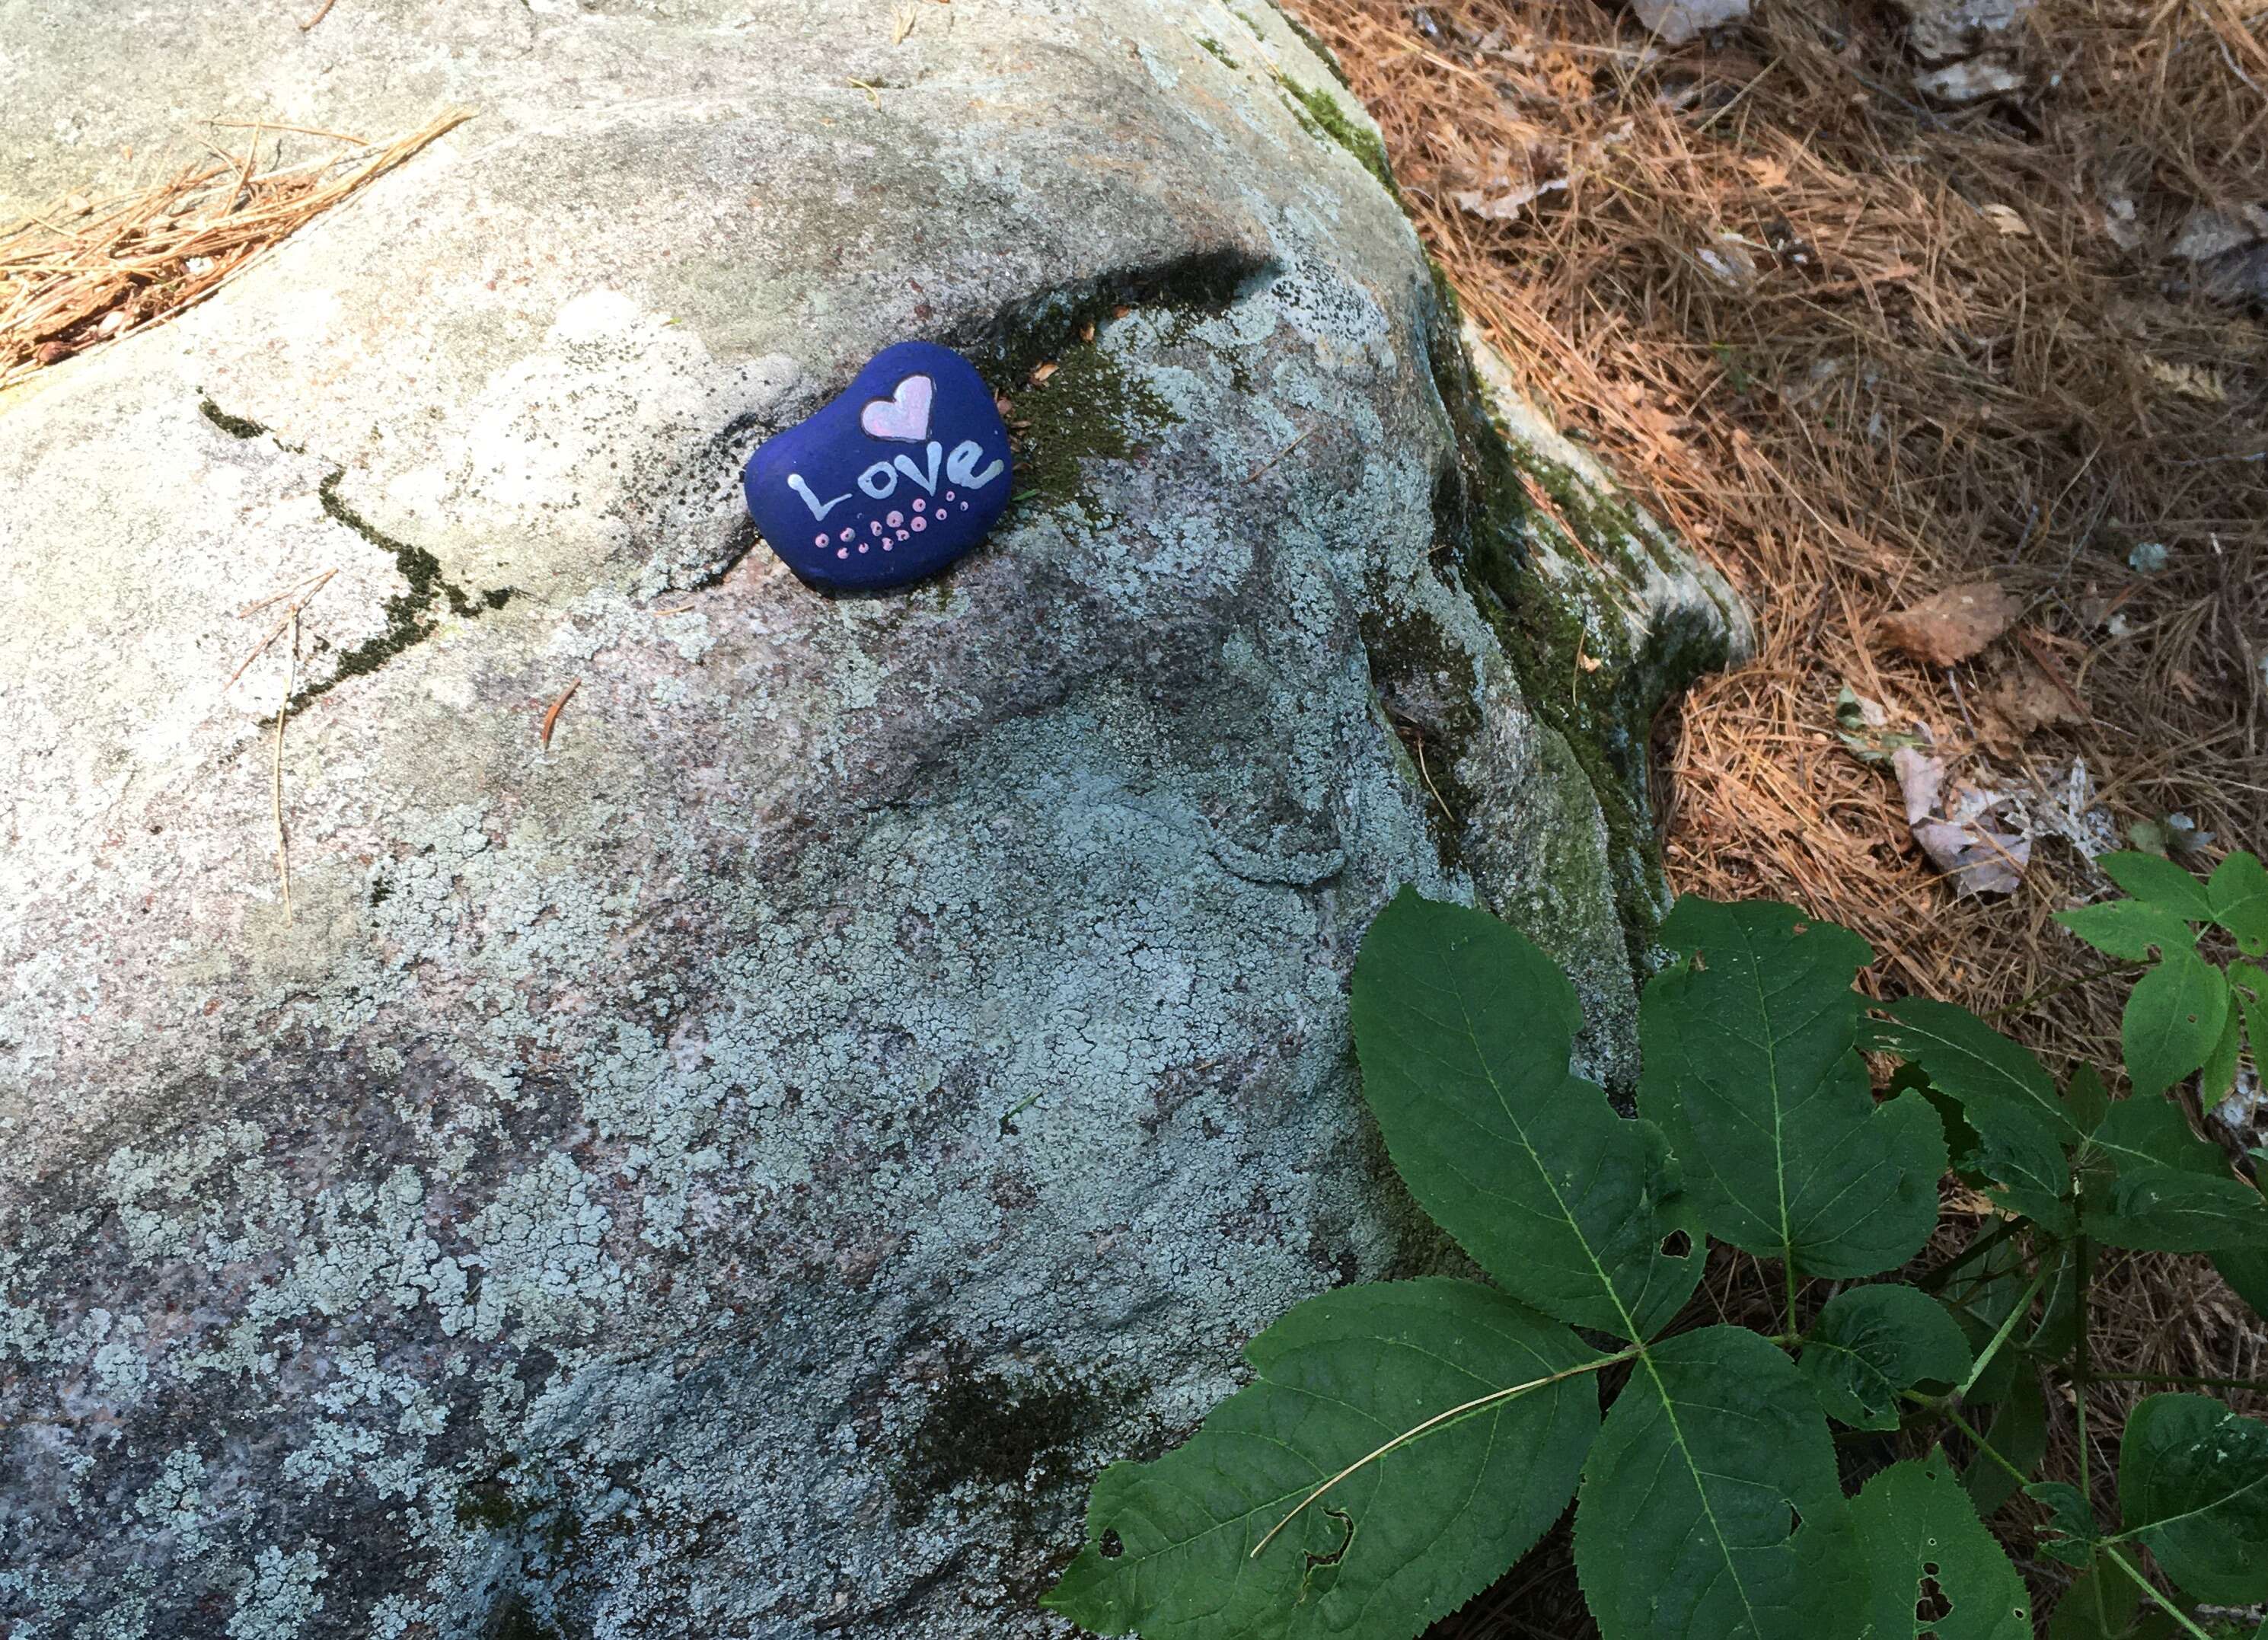 Painted rock that reads "love" in Mashkinonje Provincial Park